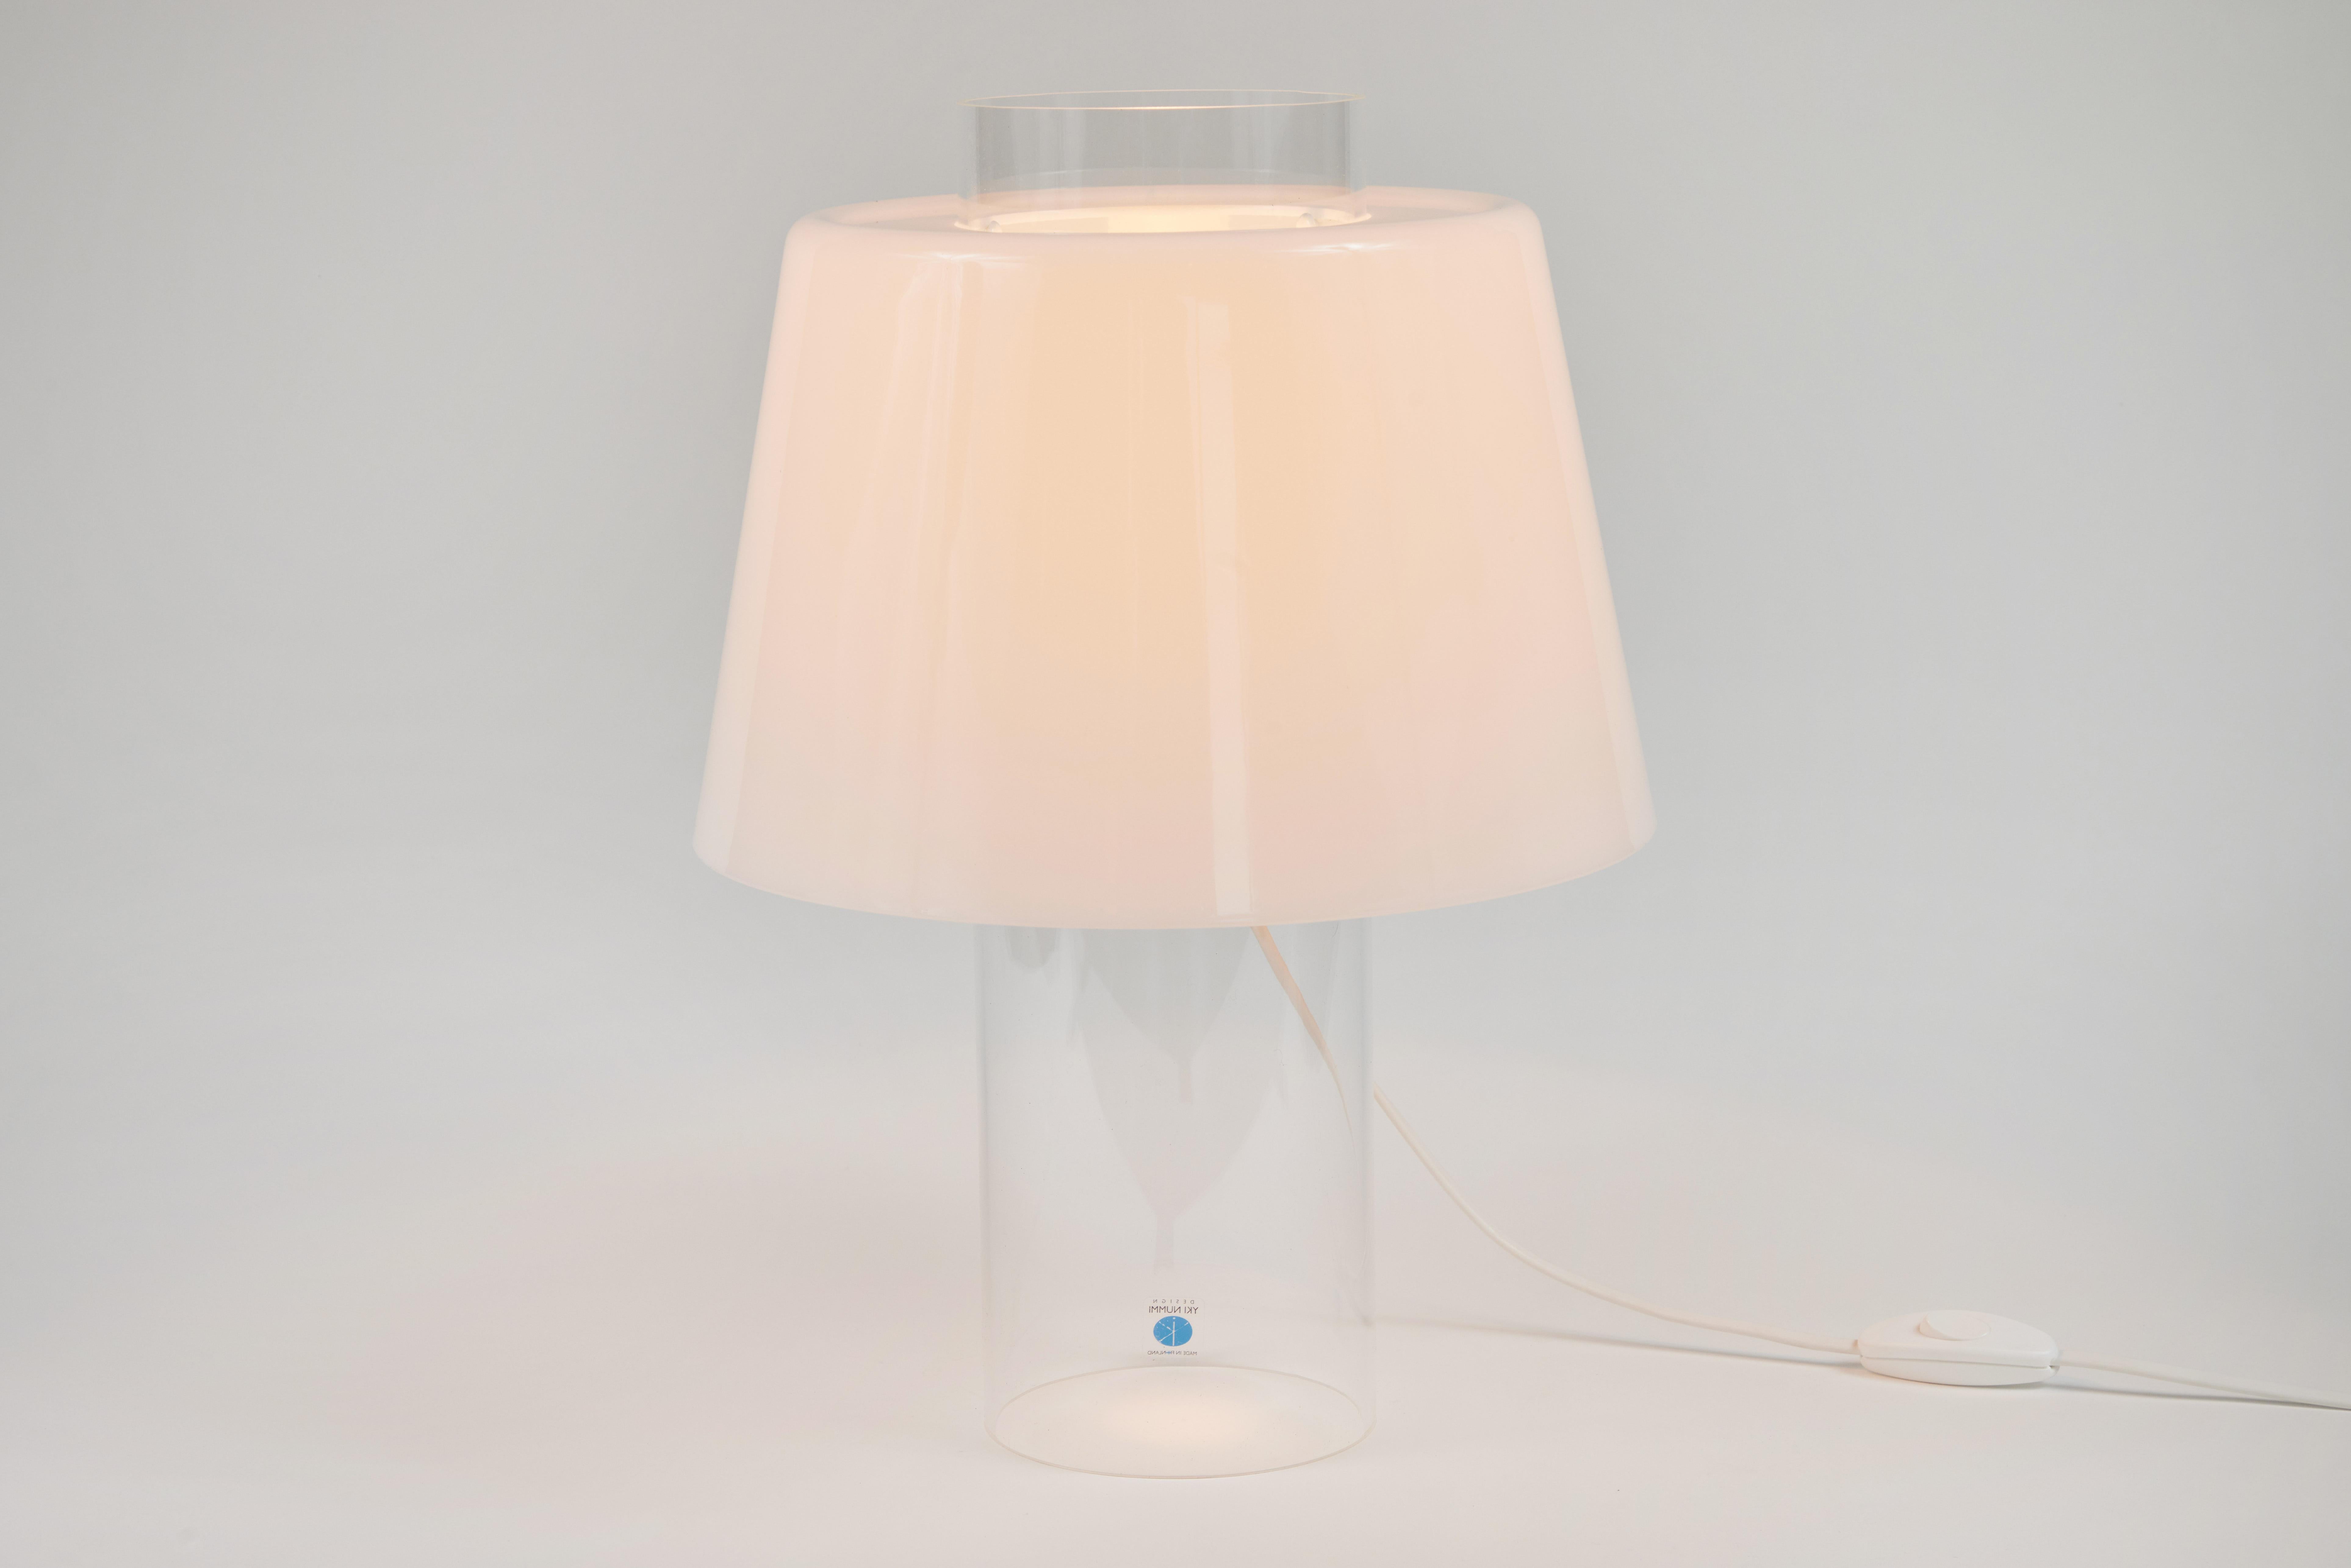 Yki Nummi 'Modern Art' table lamp for Innolux Oy, Finland. Designed in the 1955 for Stockmann-Orno, Nummi's iconic design is comprised of an opaline white acrylic conical shade that fits atop a clear acrylic cylinder. As Nummi once observed, “People